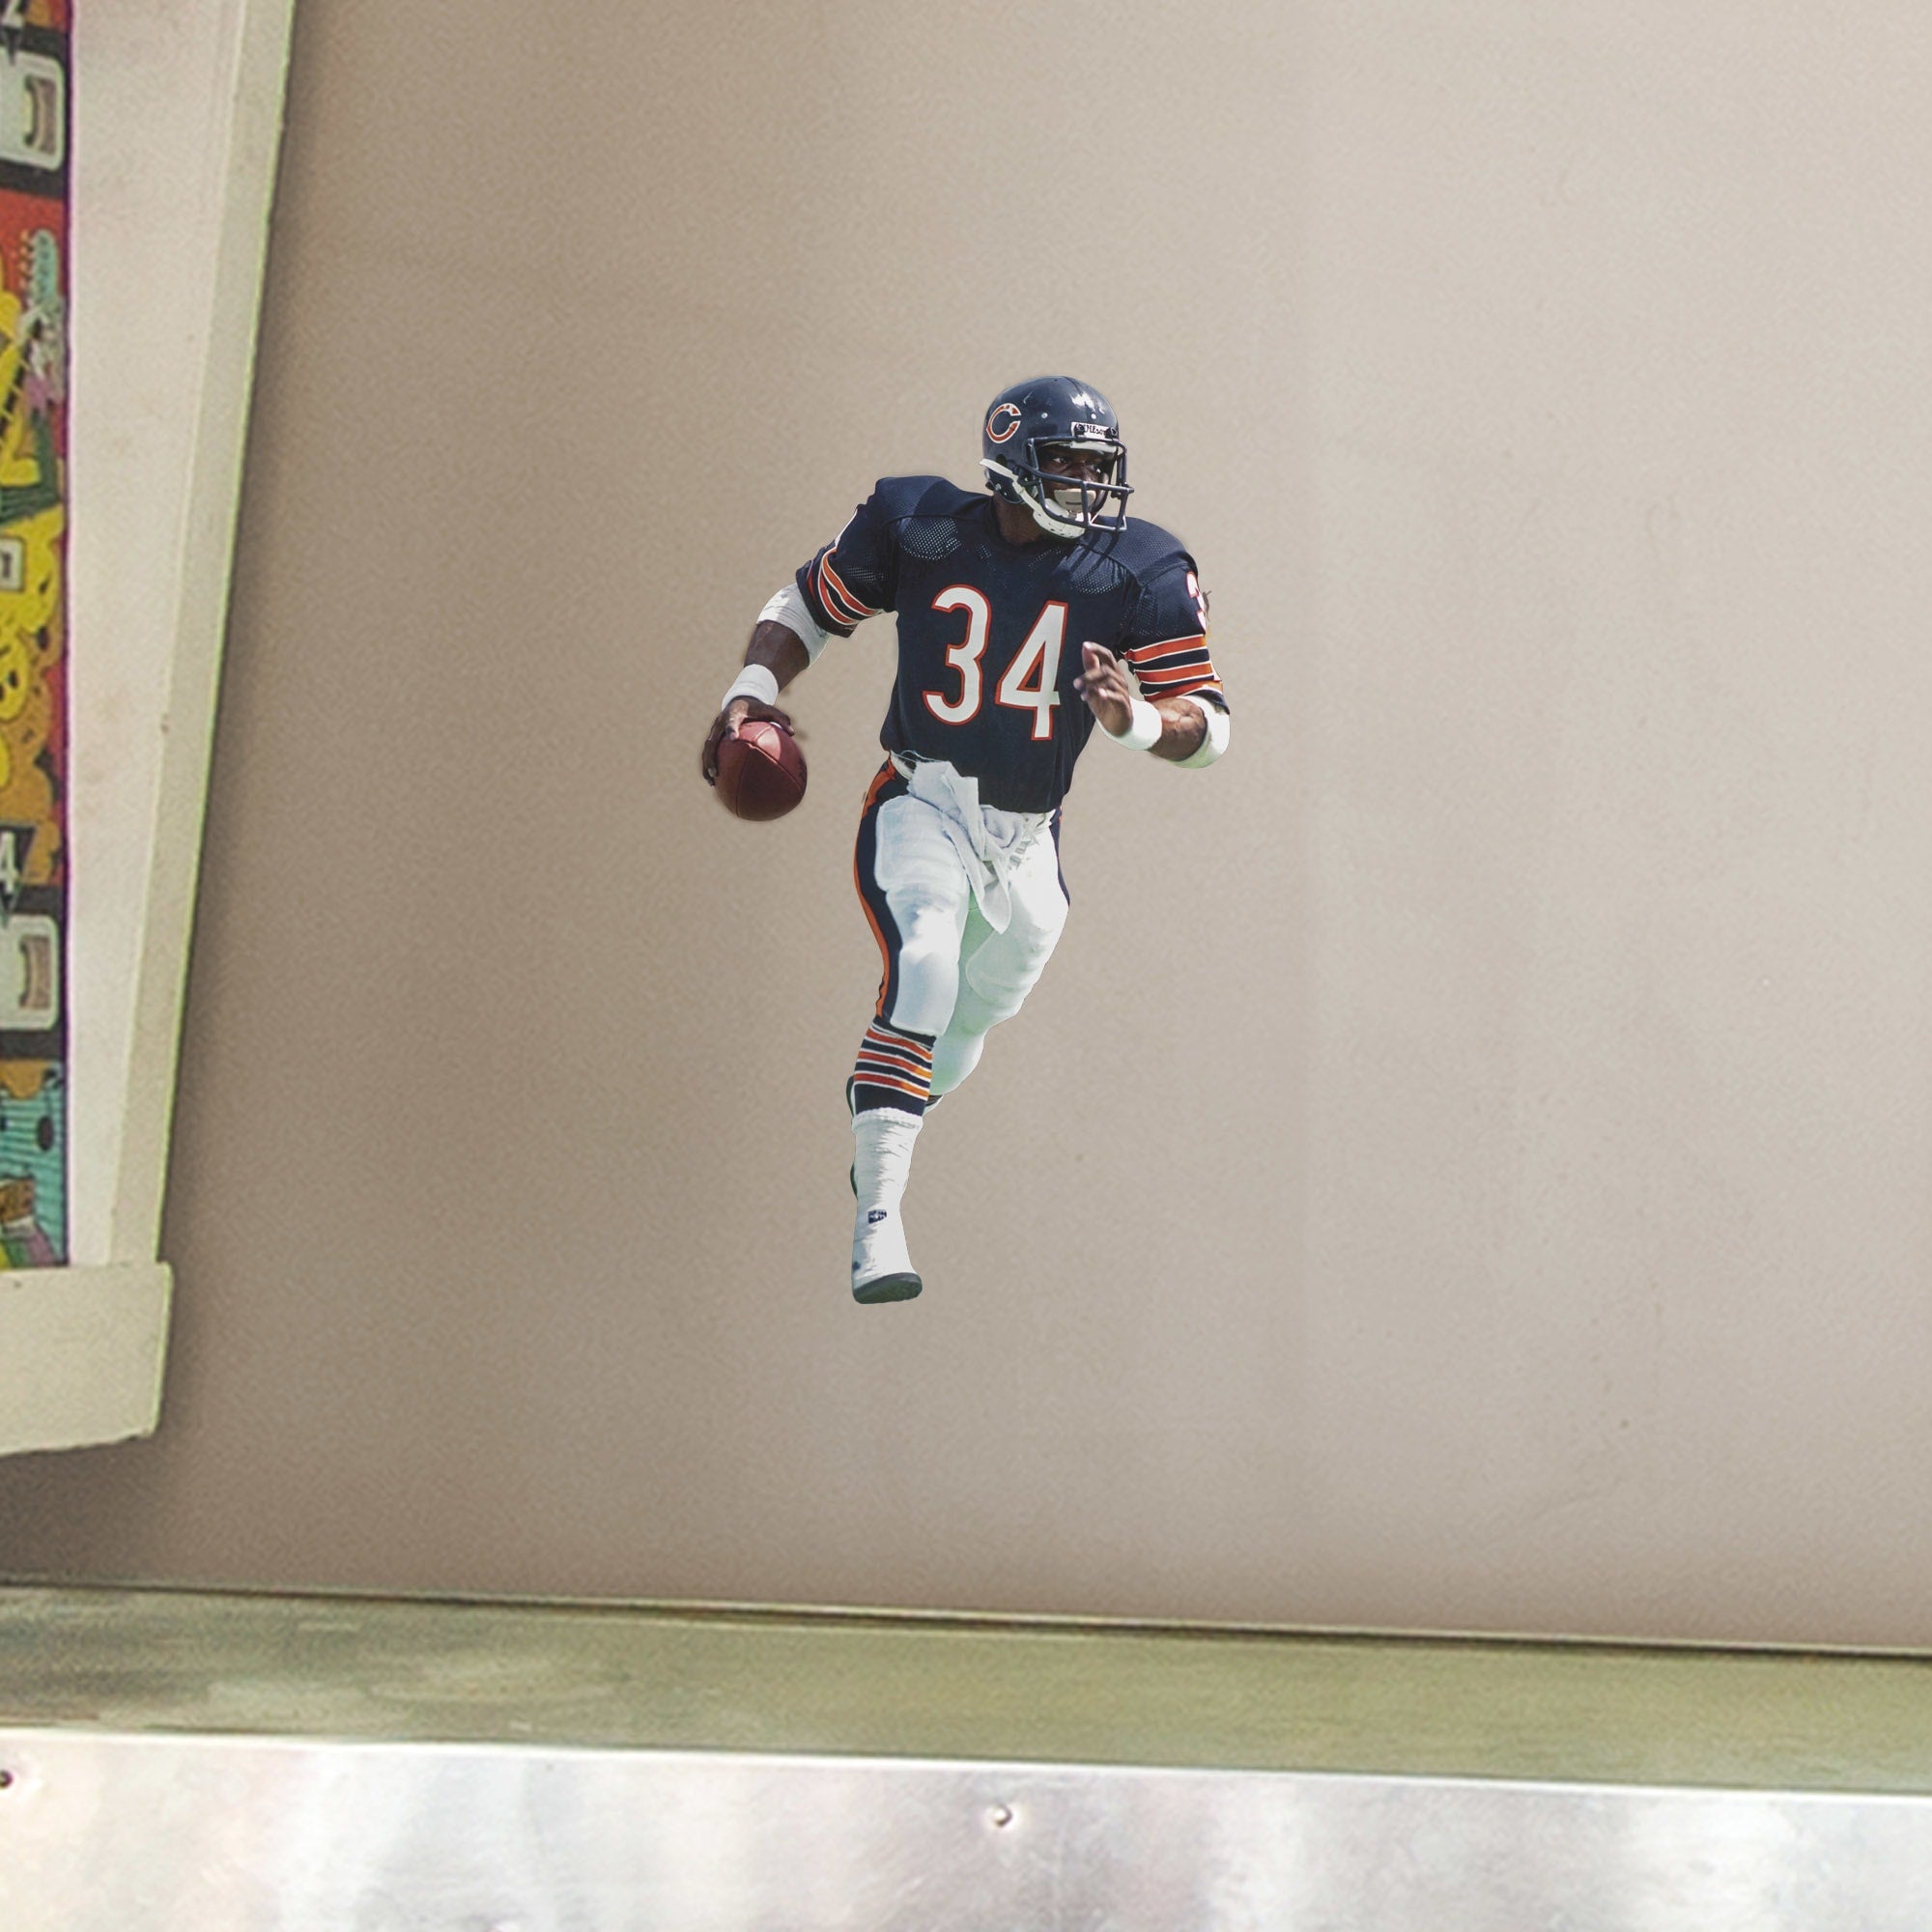 Walter Payton for Chicago Bears: Legend - Officially Licensed NFL Removable Wall Decal Large by Fathead | Vinyl